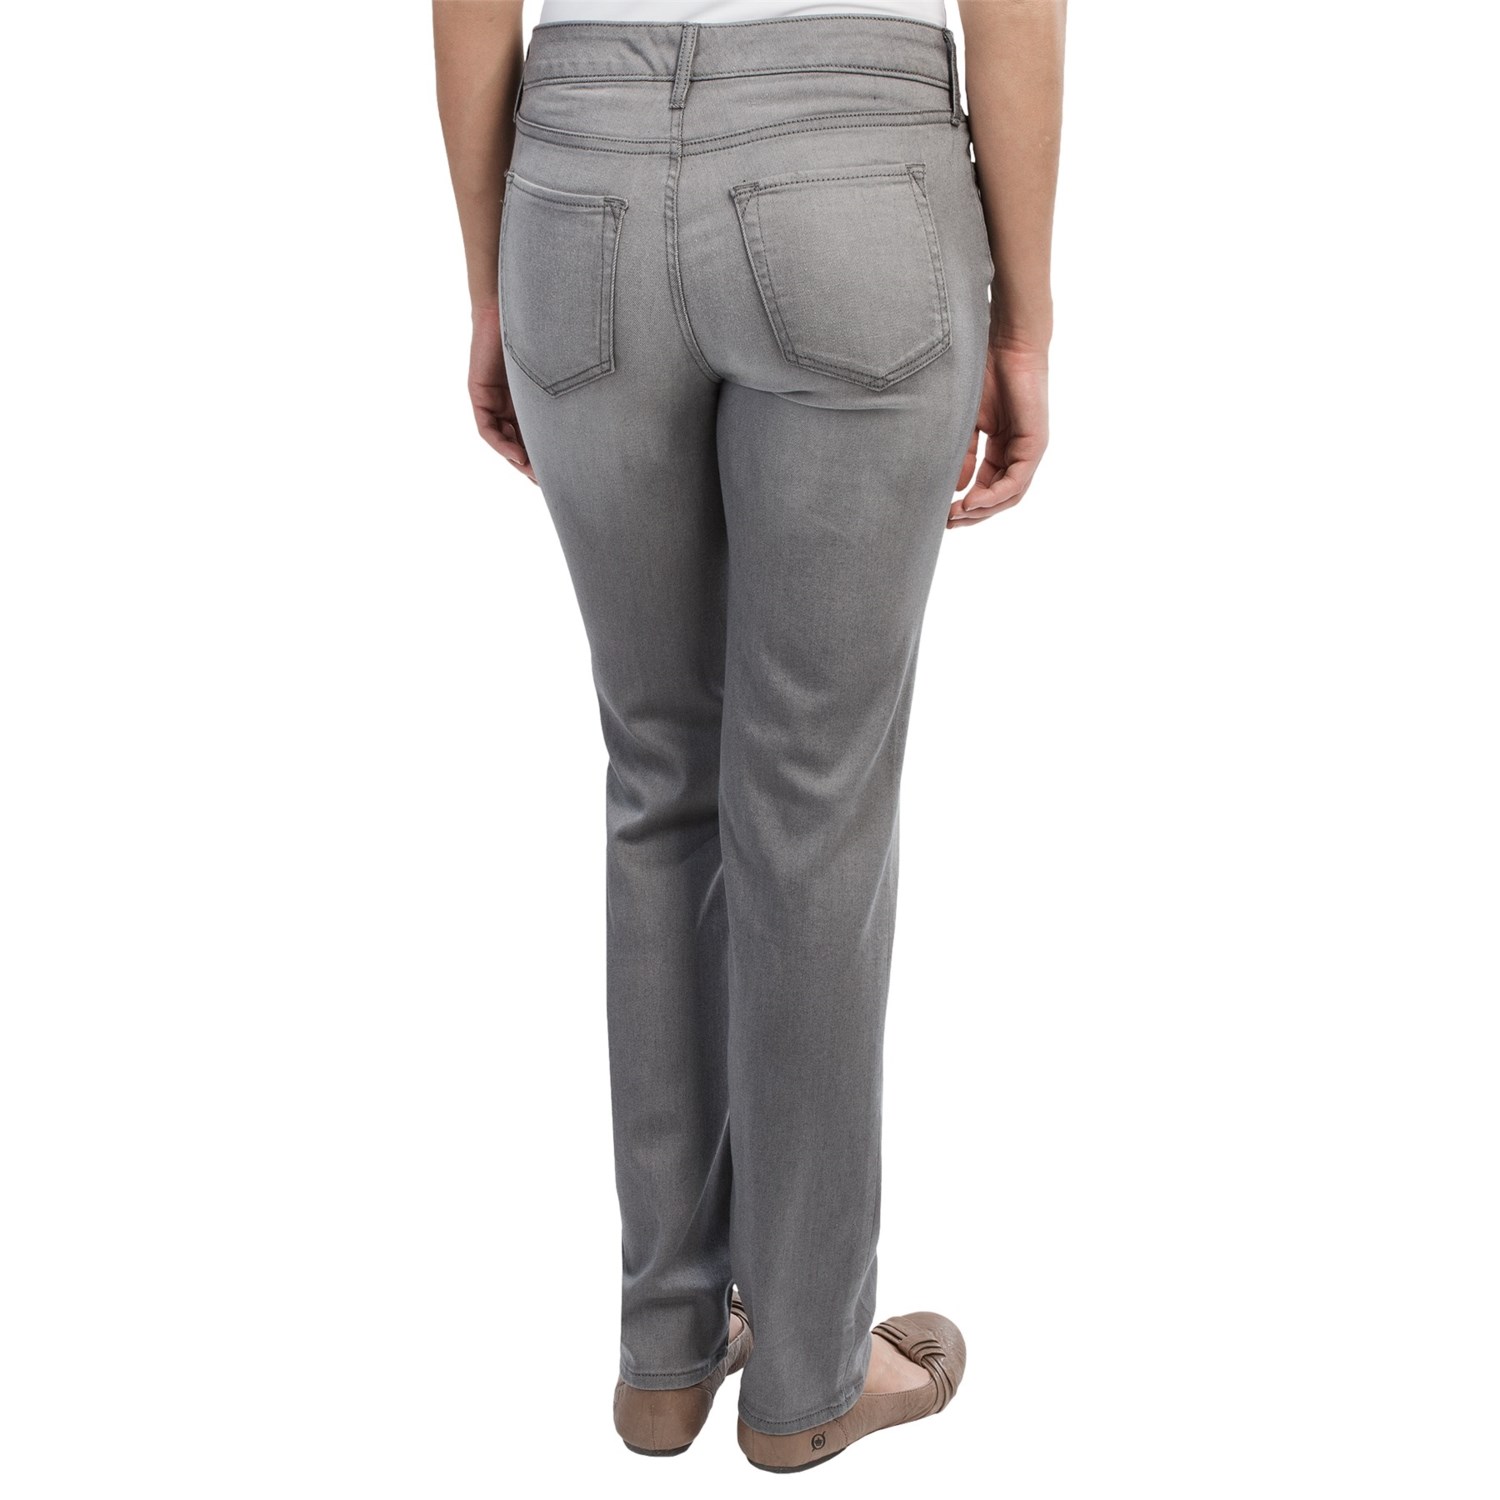 Five-Pocket Twill Pants (For Women) 8492J - Save 78%